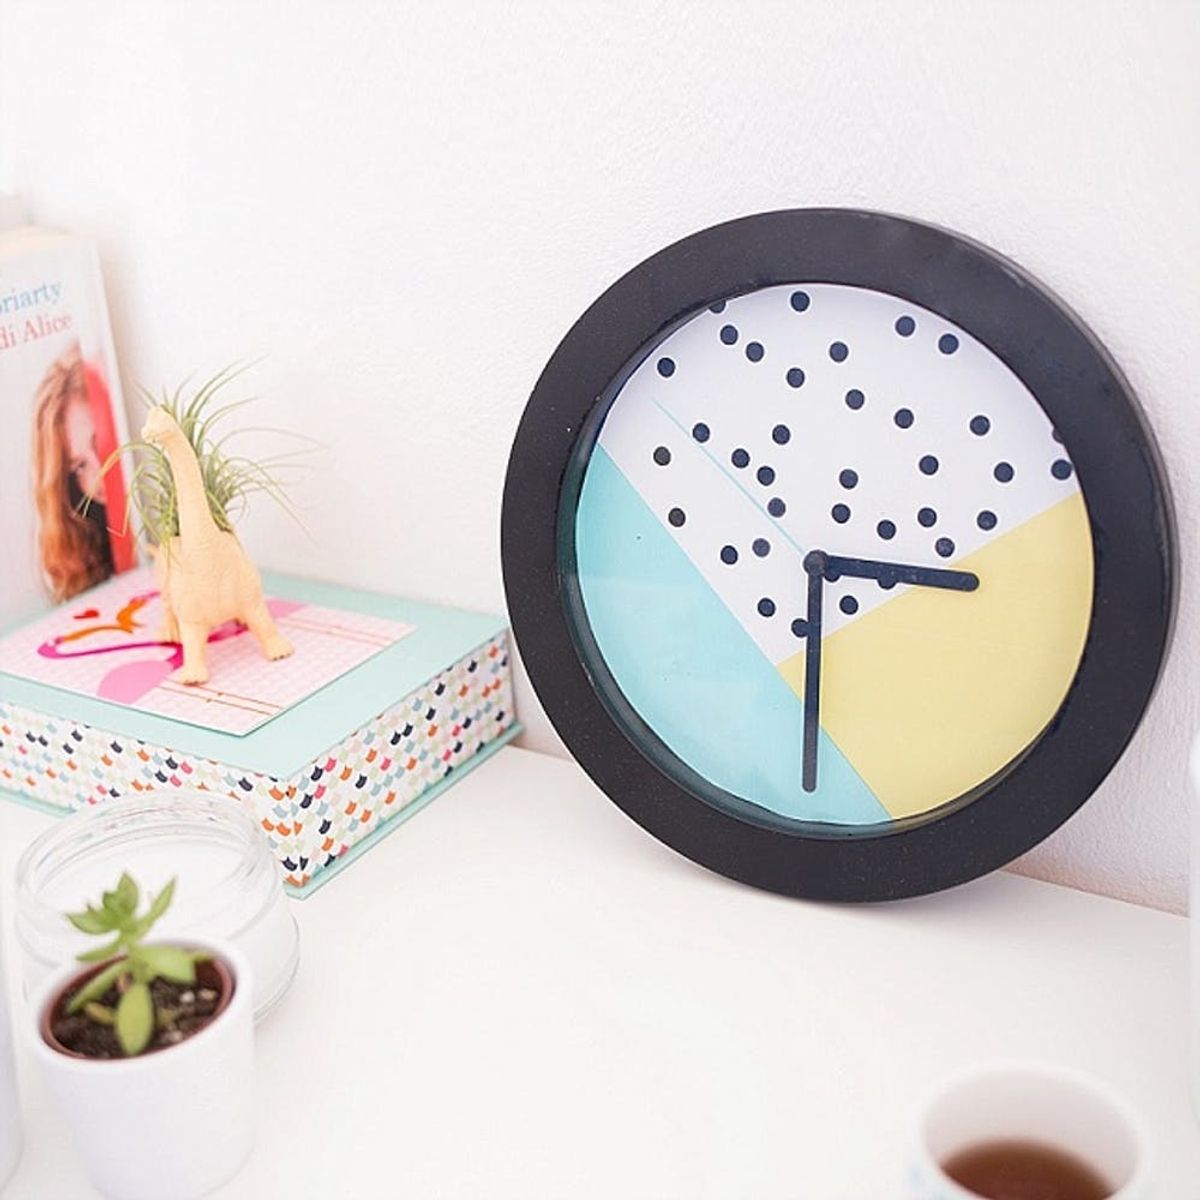 The Easiest Way to Update a Boring Old Wall Clock